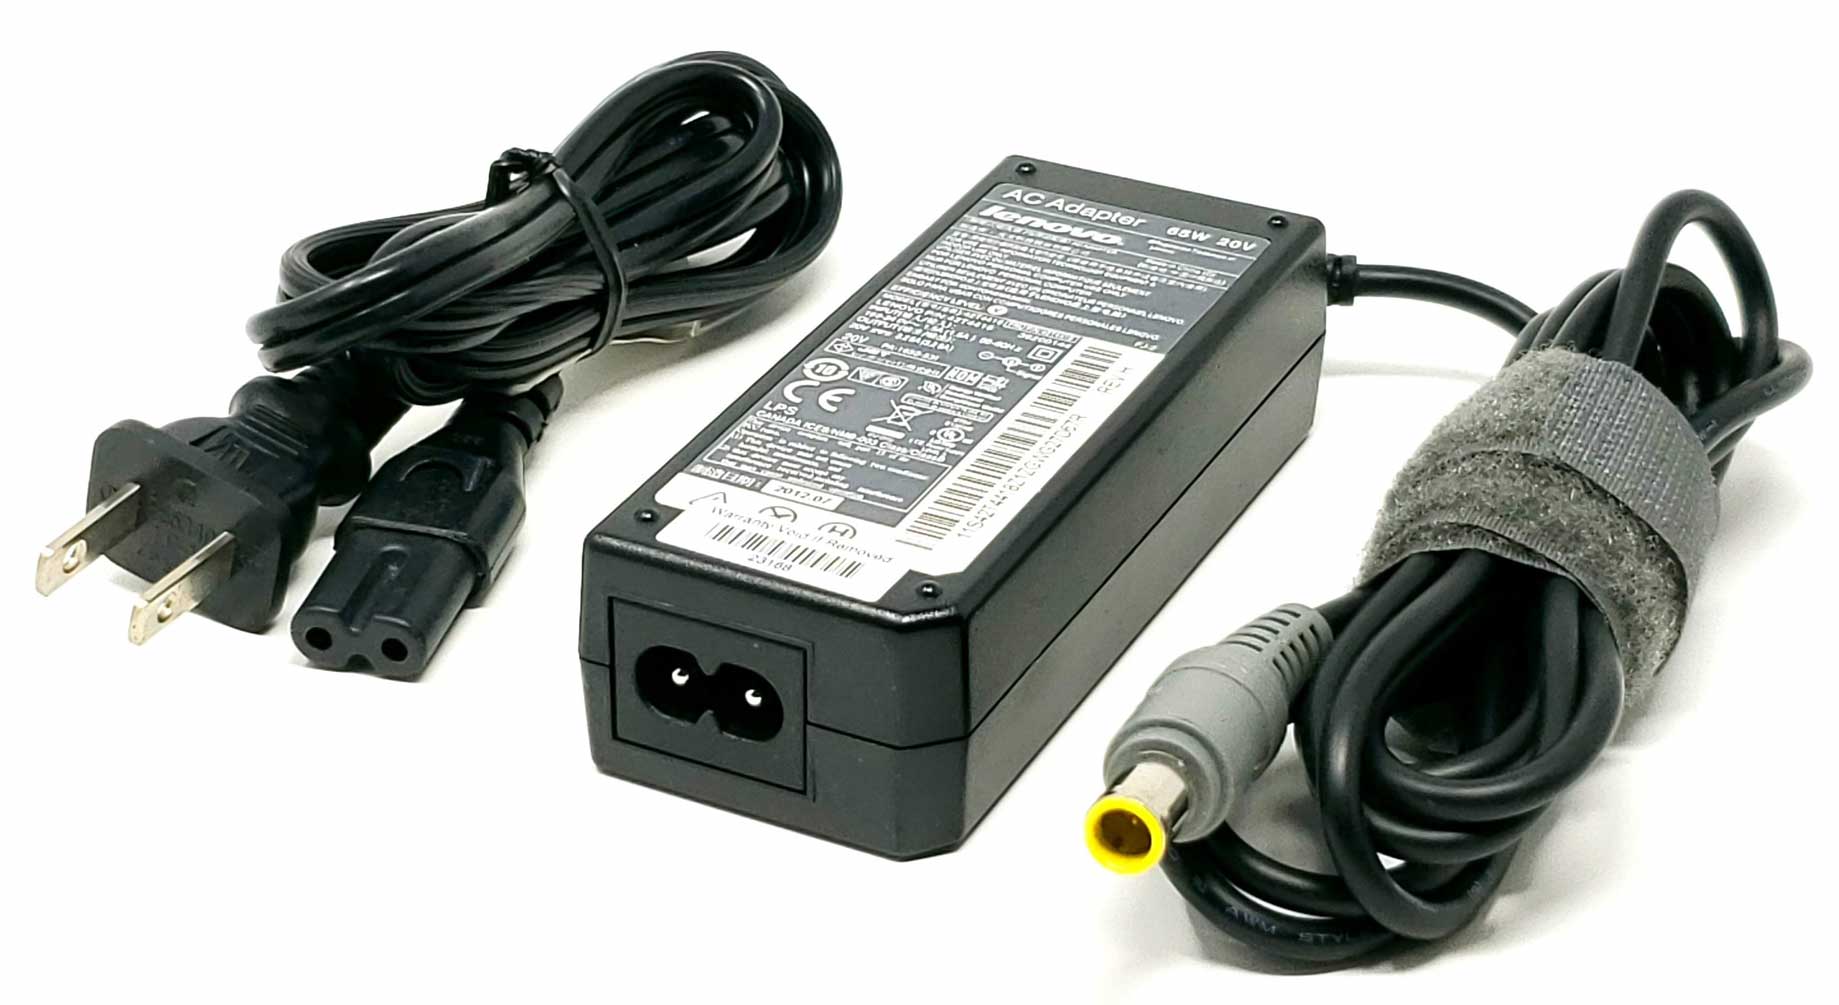 ADLX65NCT3A - 65W 3.25A AC Adapter Includes Power Cable